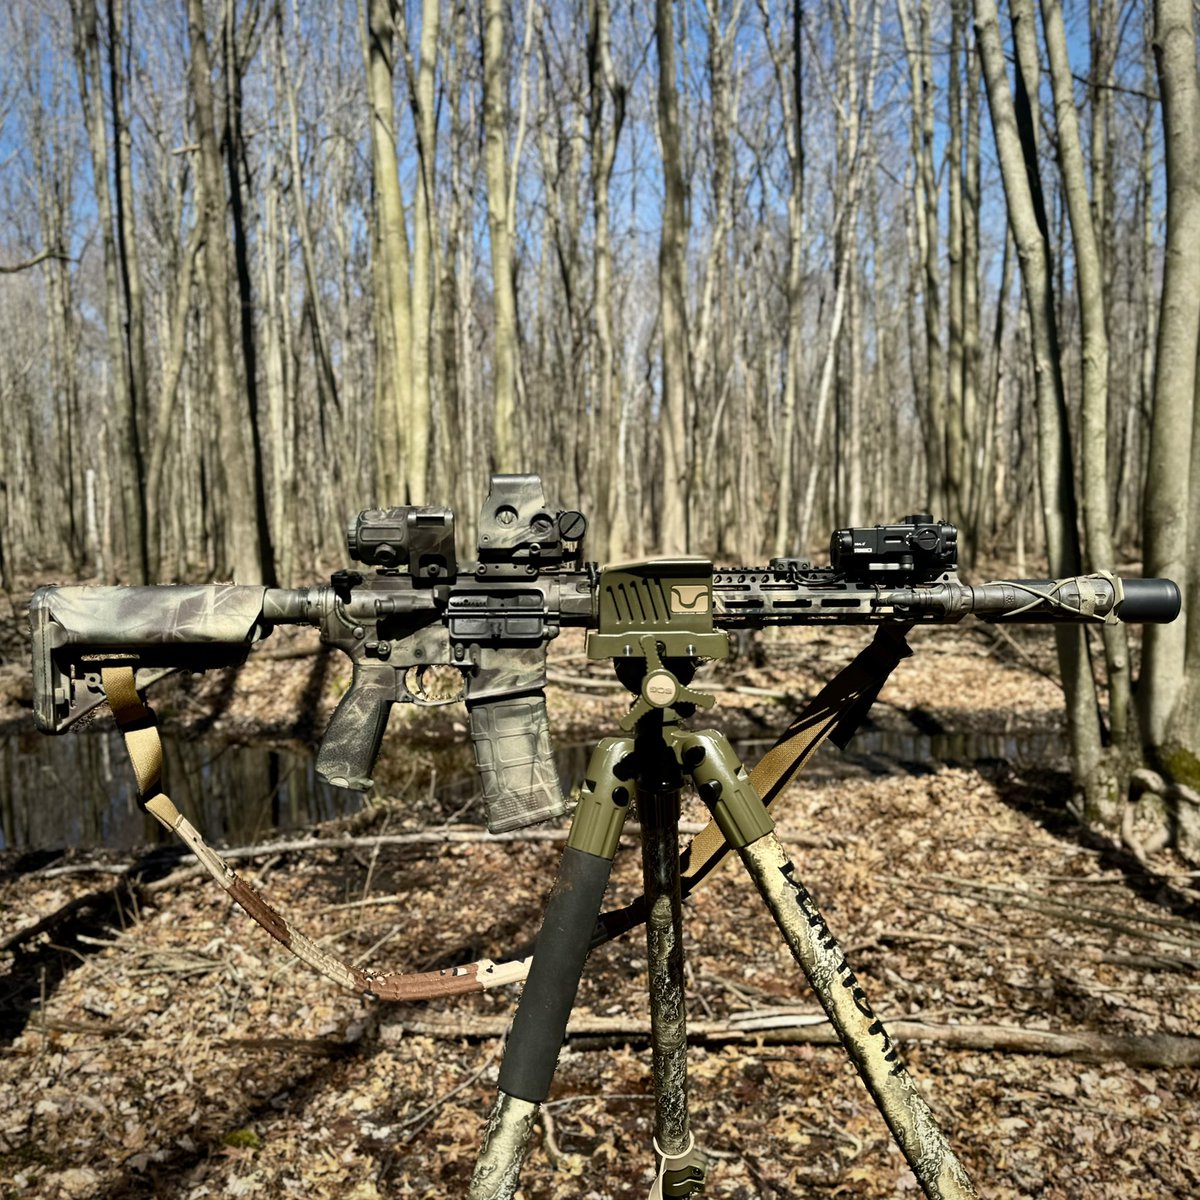 ' BOG Hunt DeathGrip tripod that I picked up from @brownellsinc has been a life saver. I use this thing all the time now.'

📸 by @the_adam_jagger

#brownells #BOGGear #tripod #buildbetter